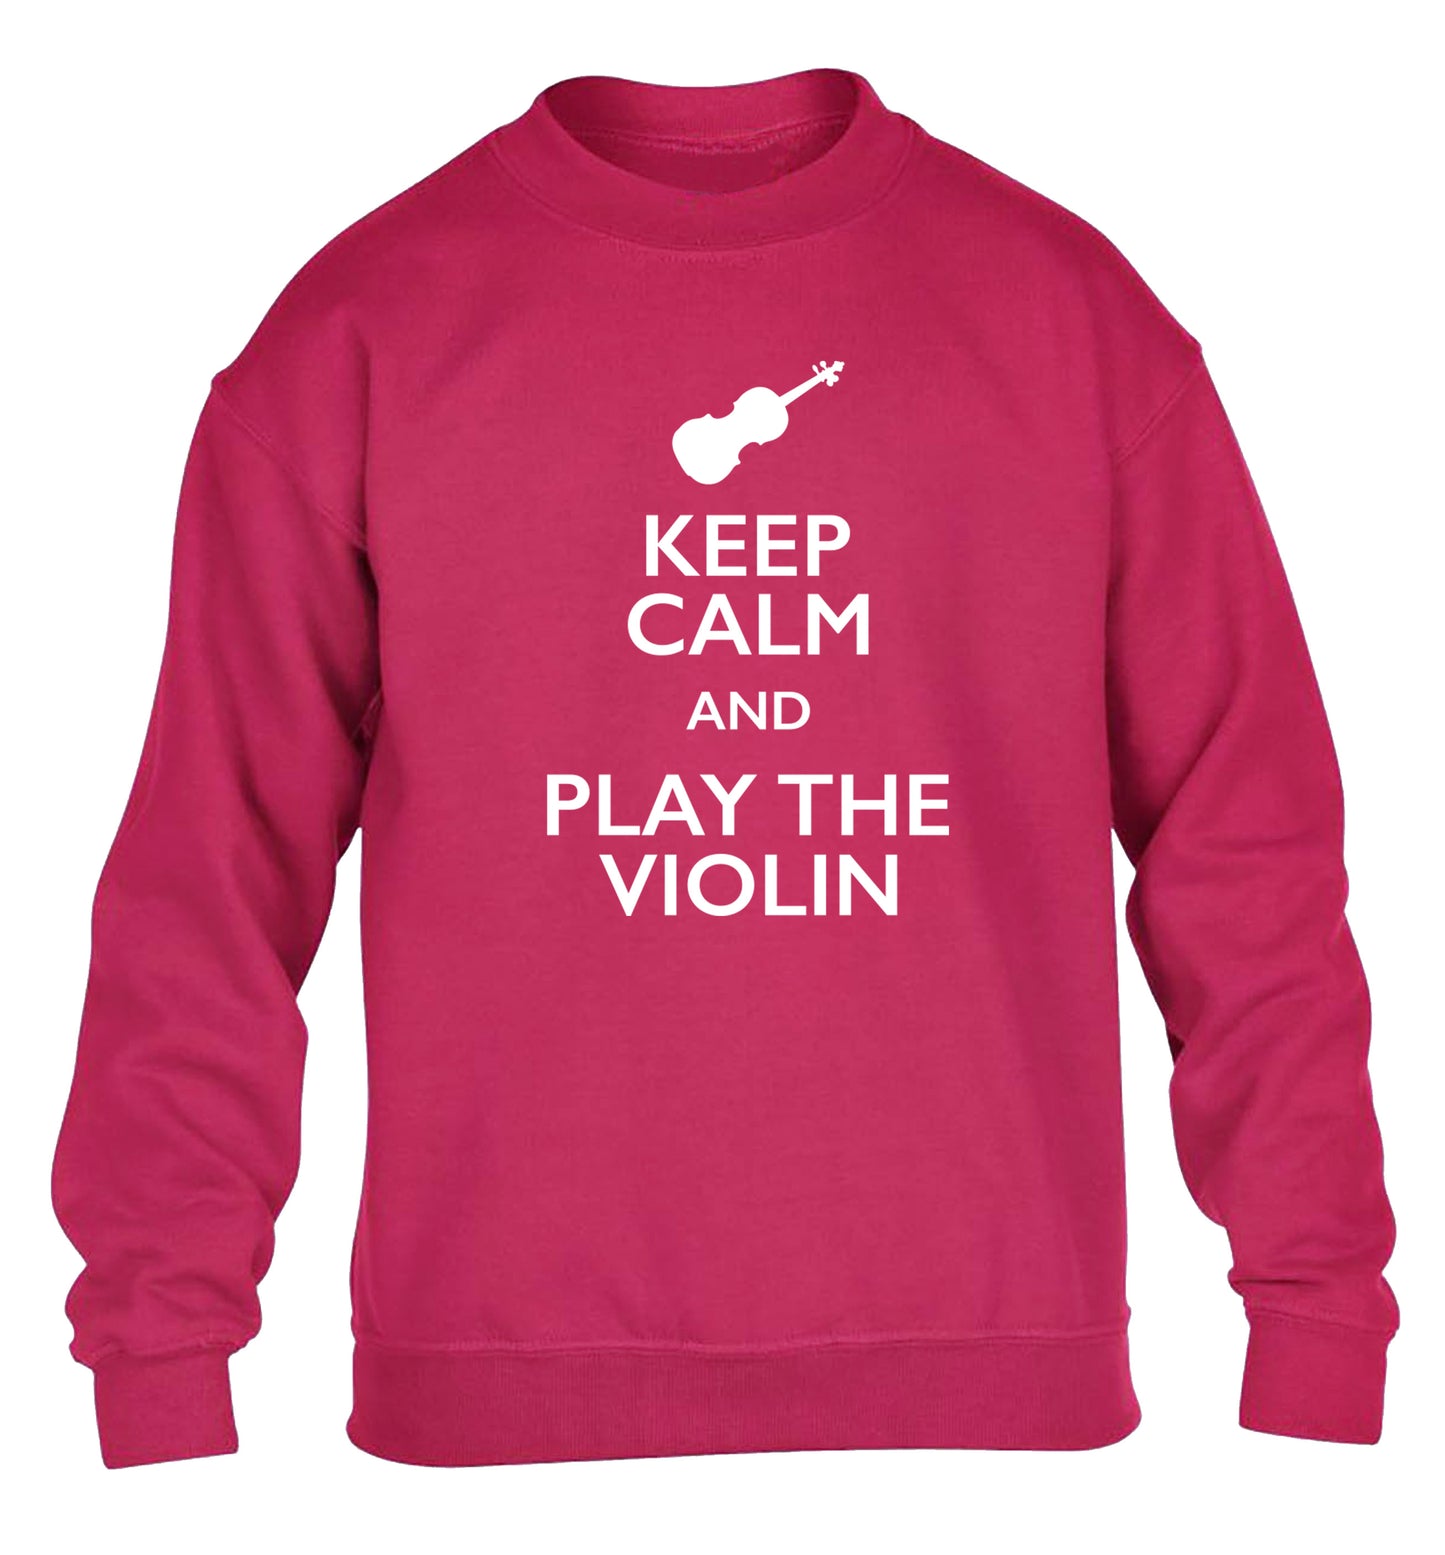 Keep calm and play the violin children's pink sweater 12-13 Years